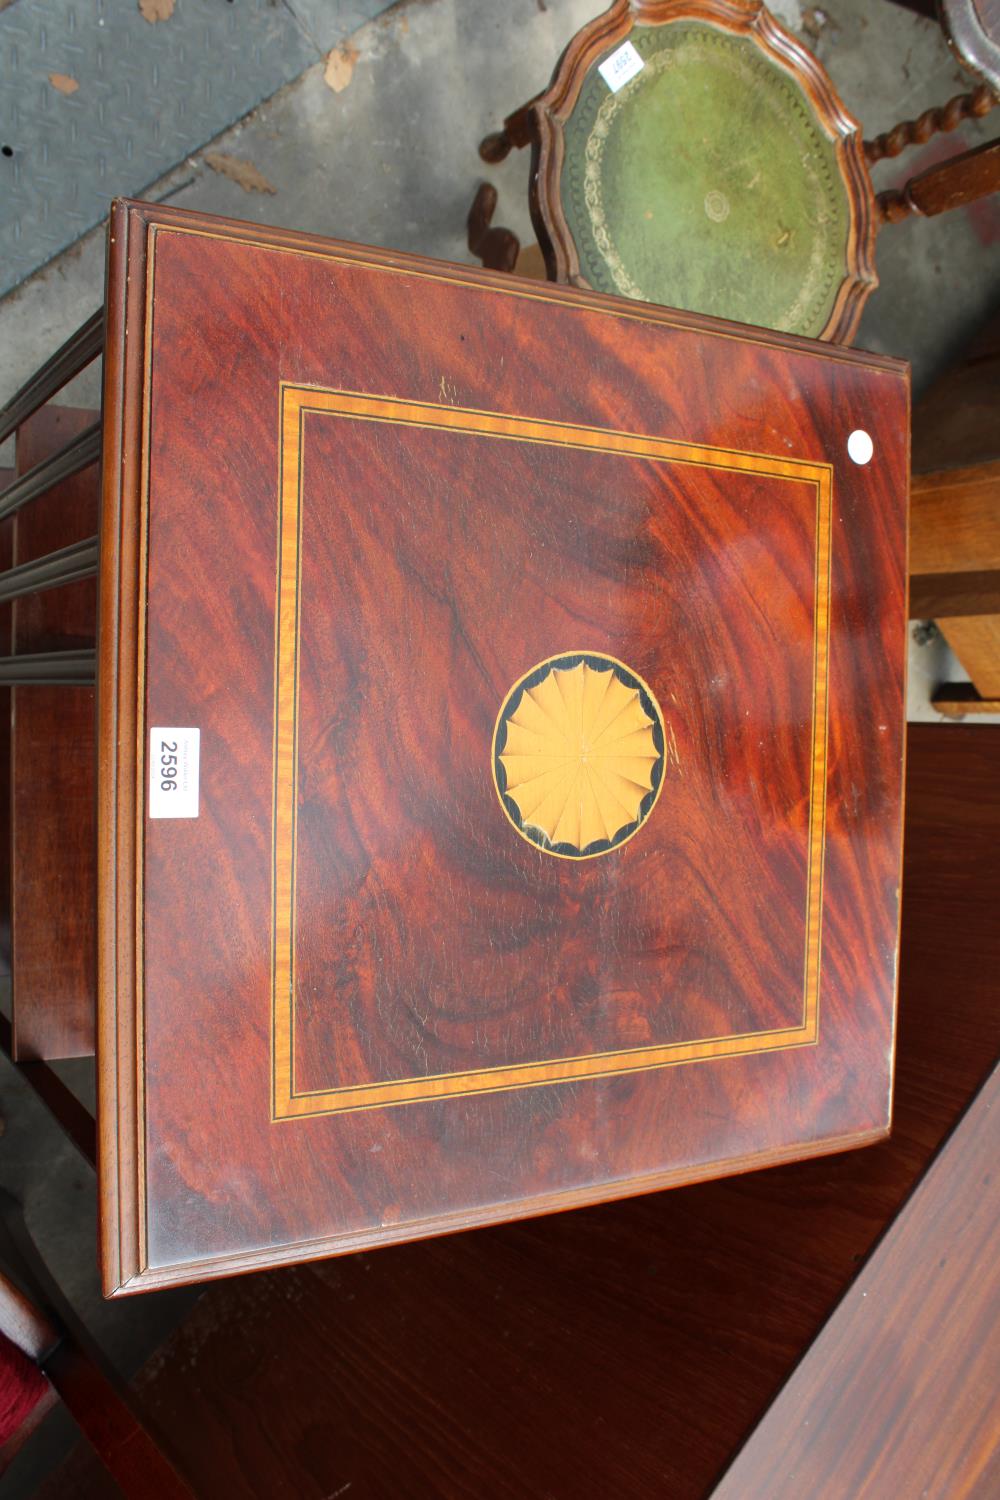 A MAHOGANY AND INLAID EDWARDIAN STYLE REVOLVING BOOKCASE, 19" SQUARE - Image 3 of 4